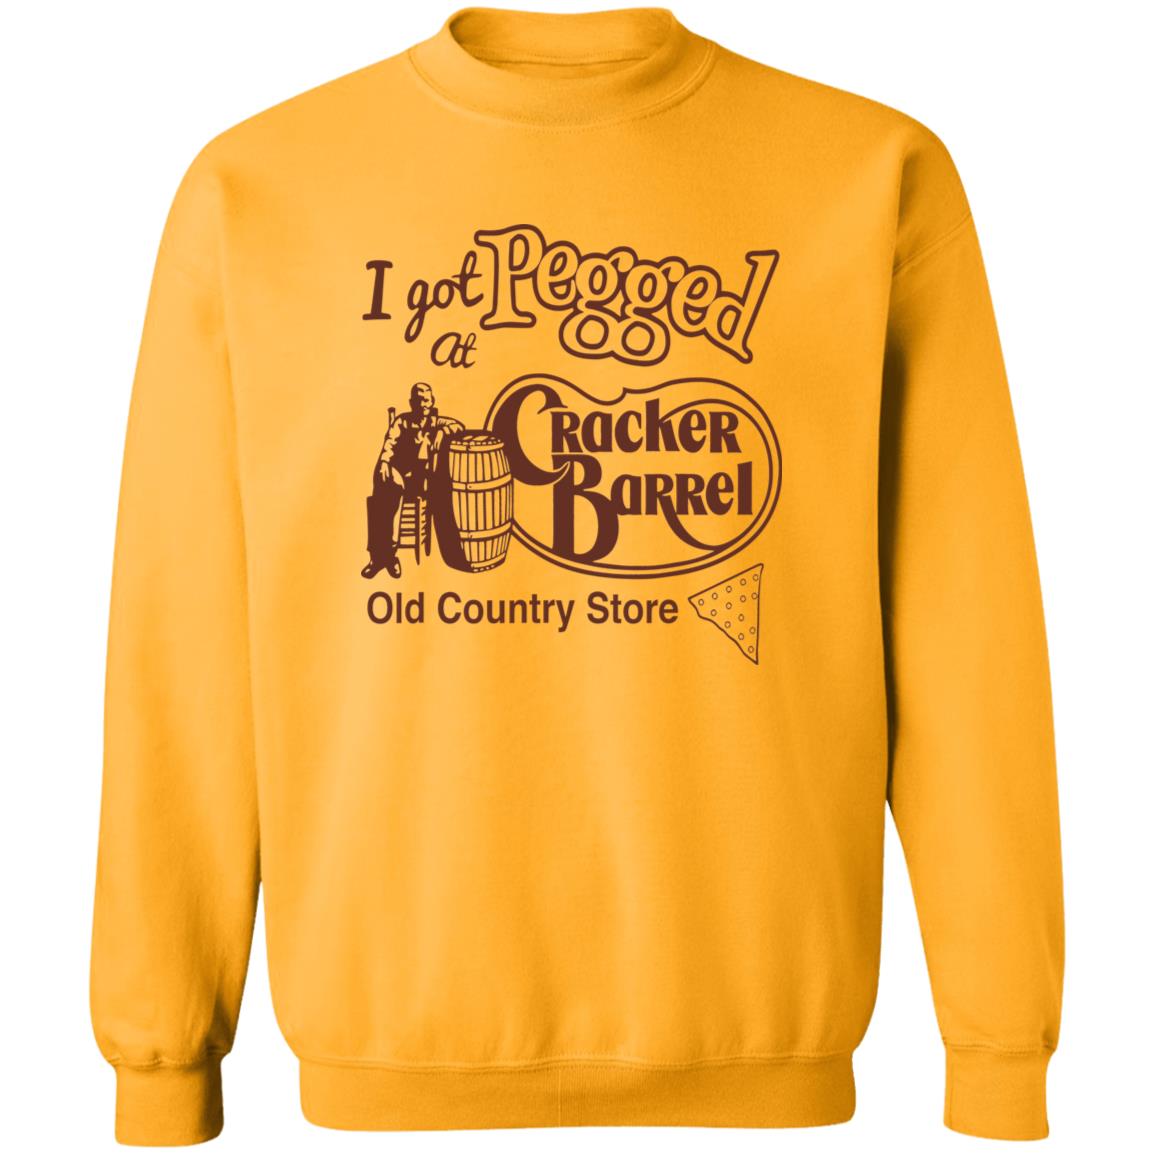 I Got Pegged At Cracker Barrel Old Country Store Shirt 2